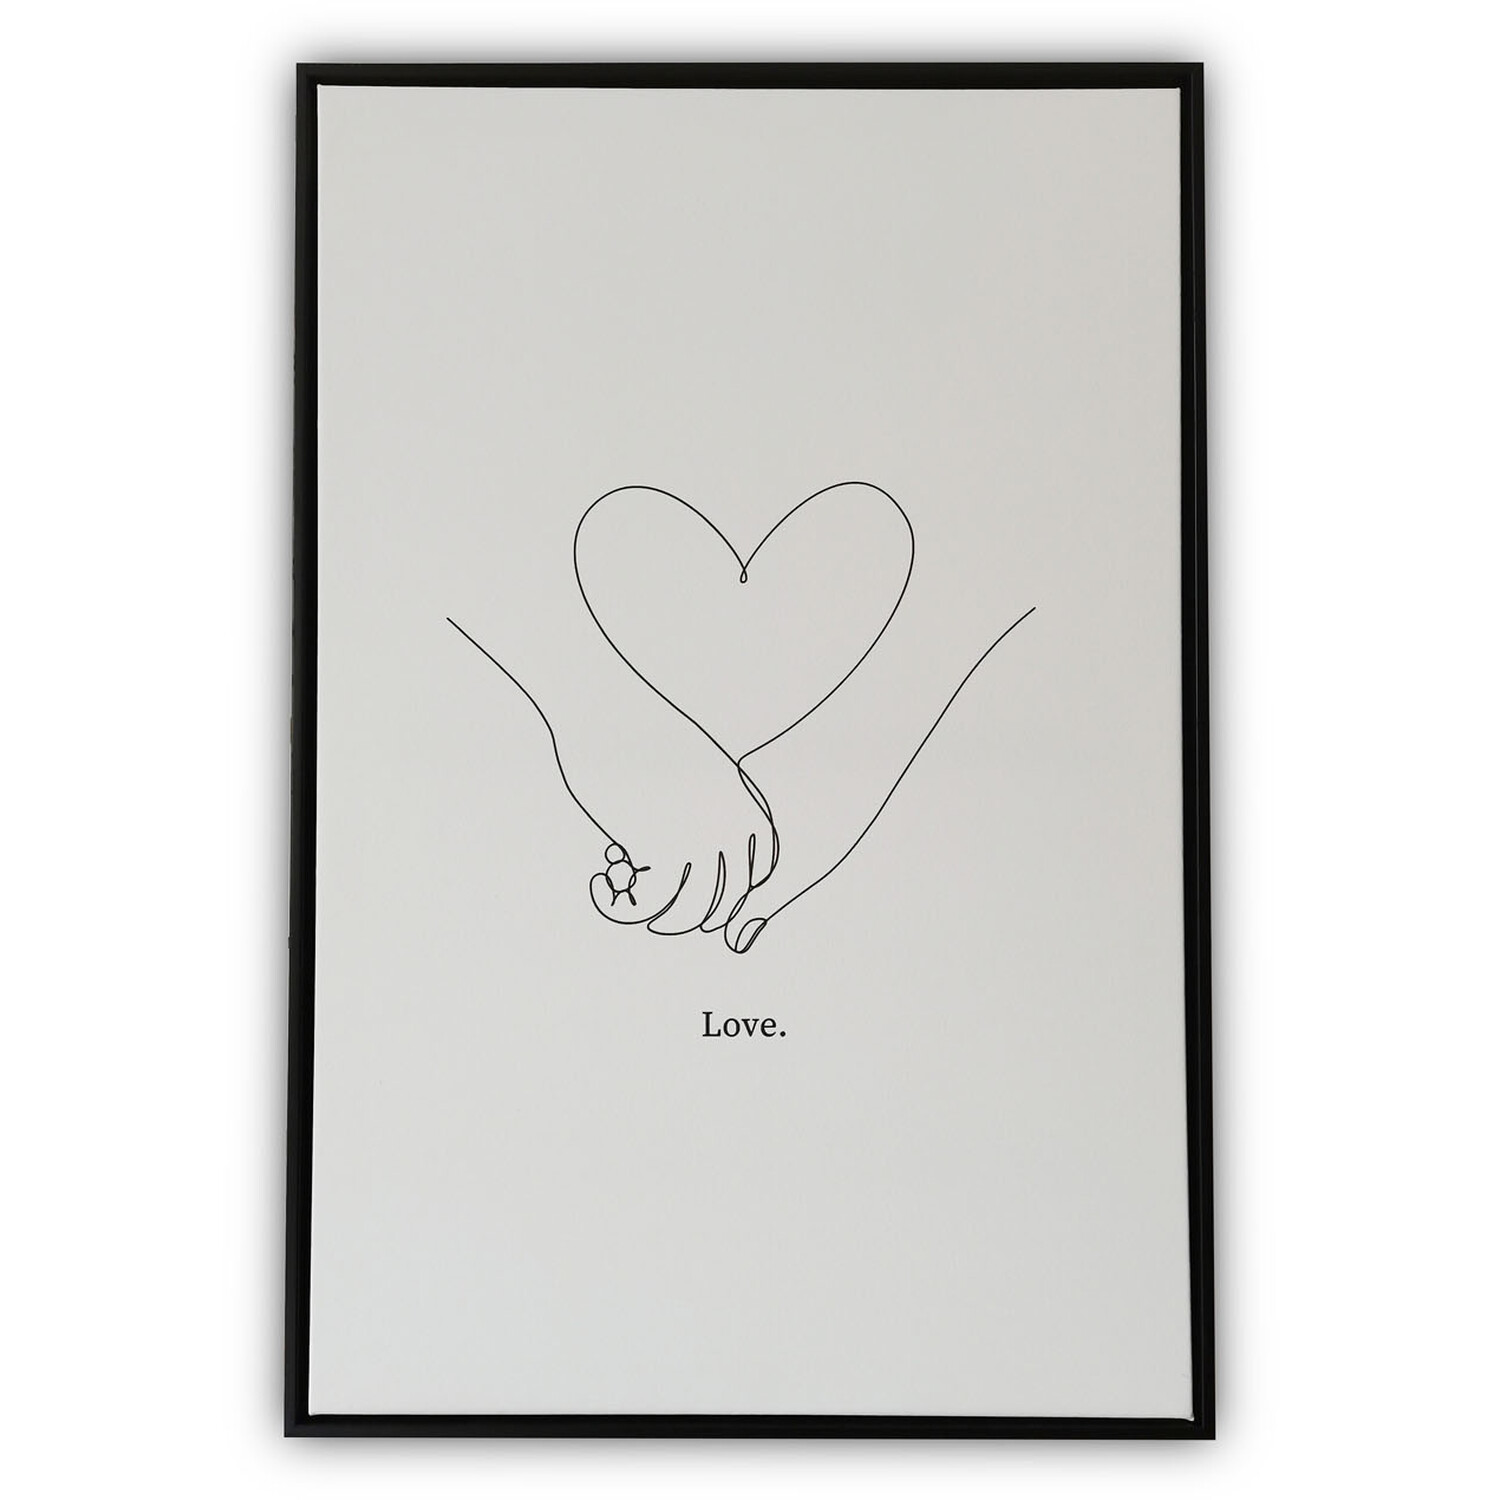 Love Entwined Hands Wall Art 60 x 40cm Image